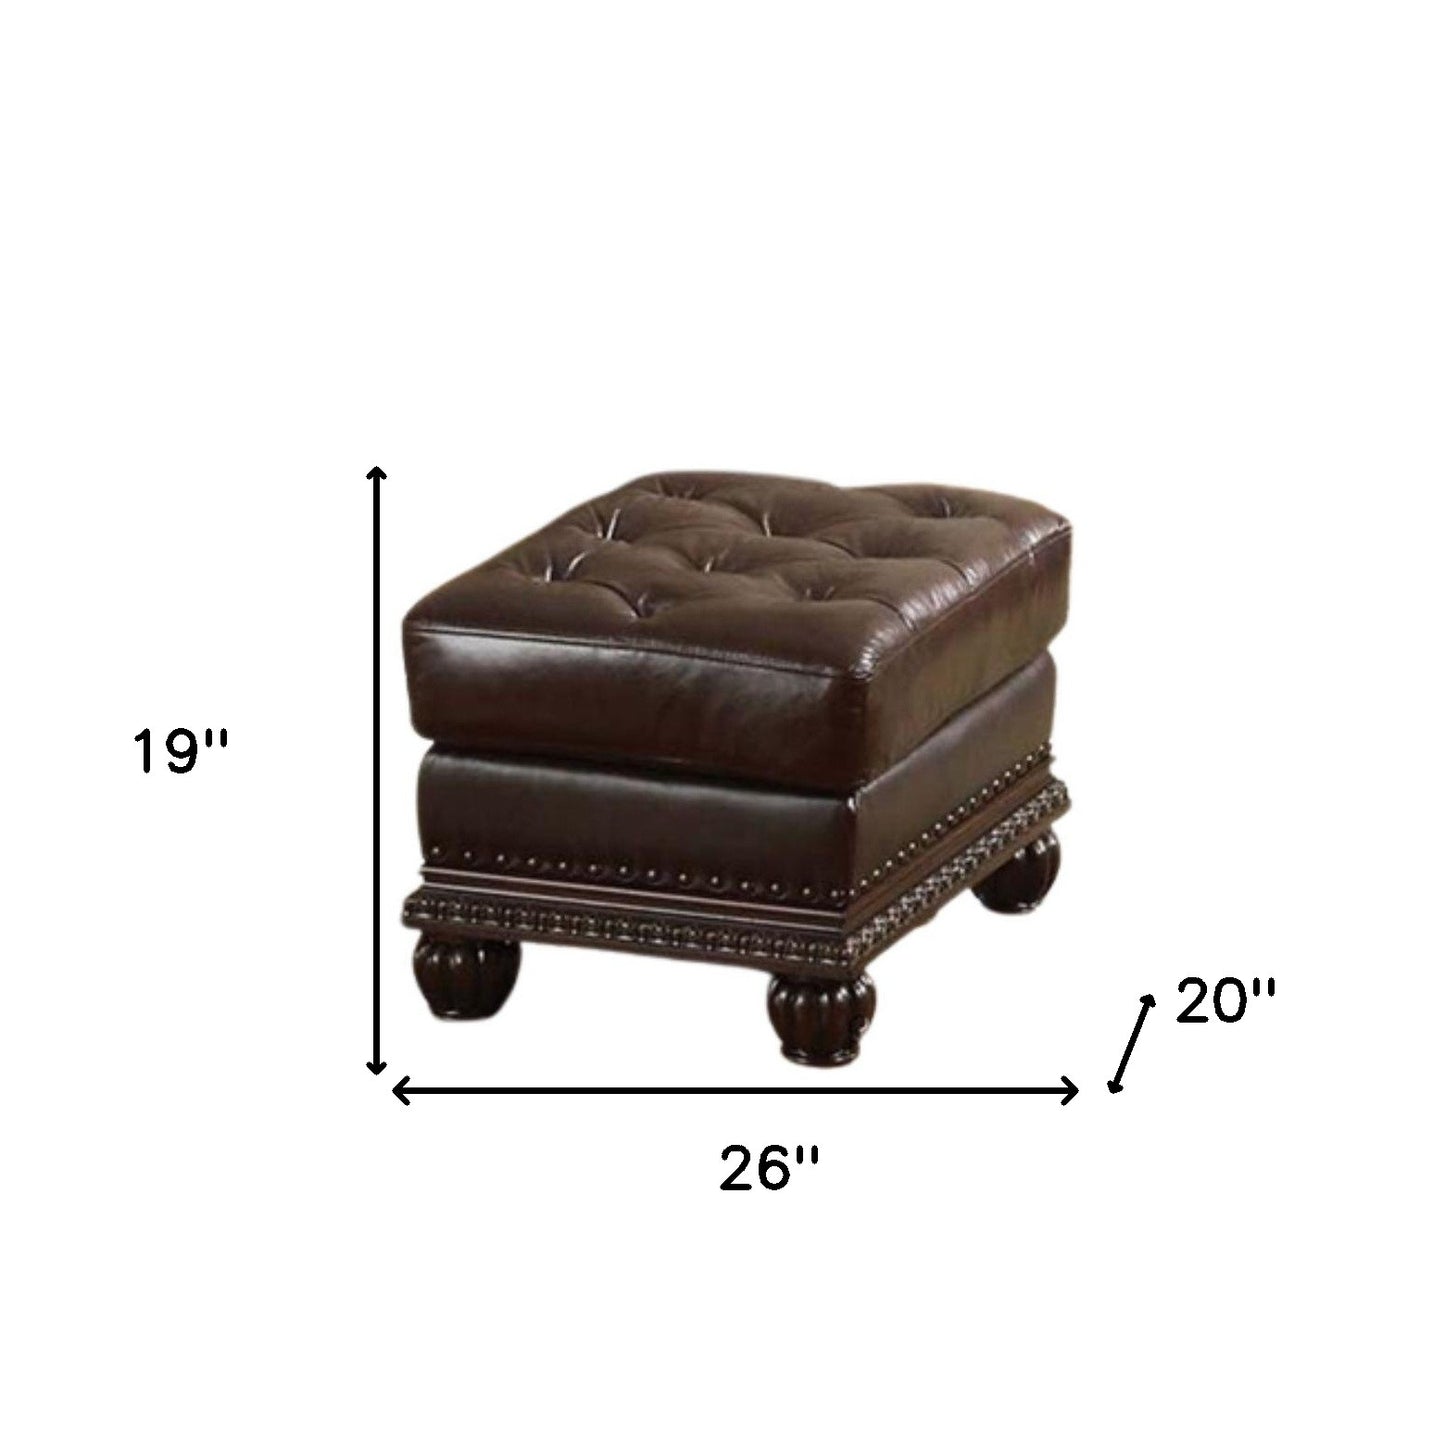 26" Brown Faux Leather Tufted Ottoman